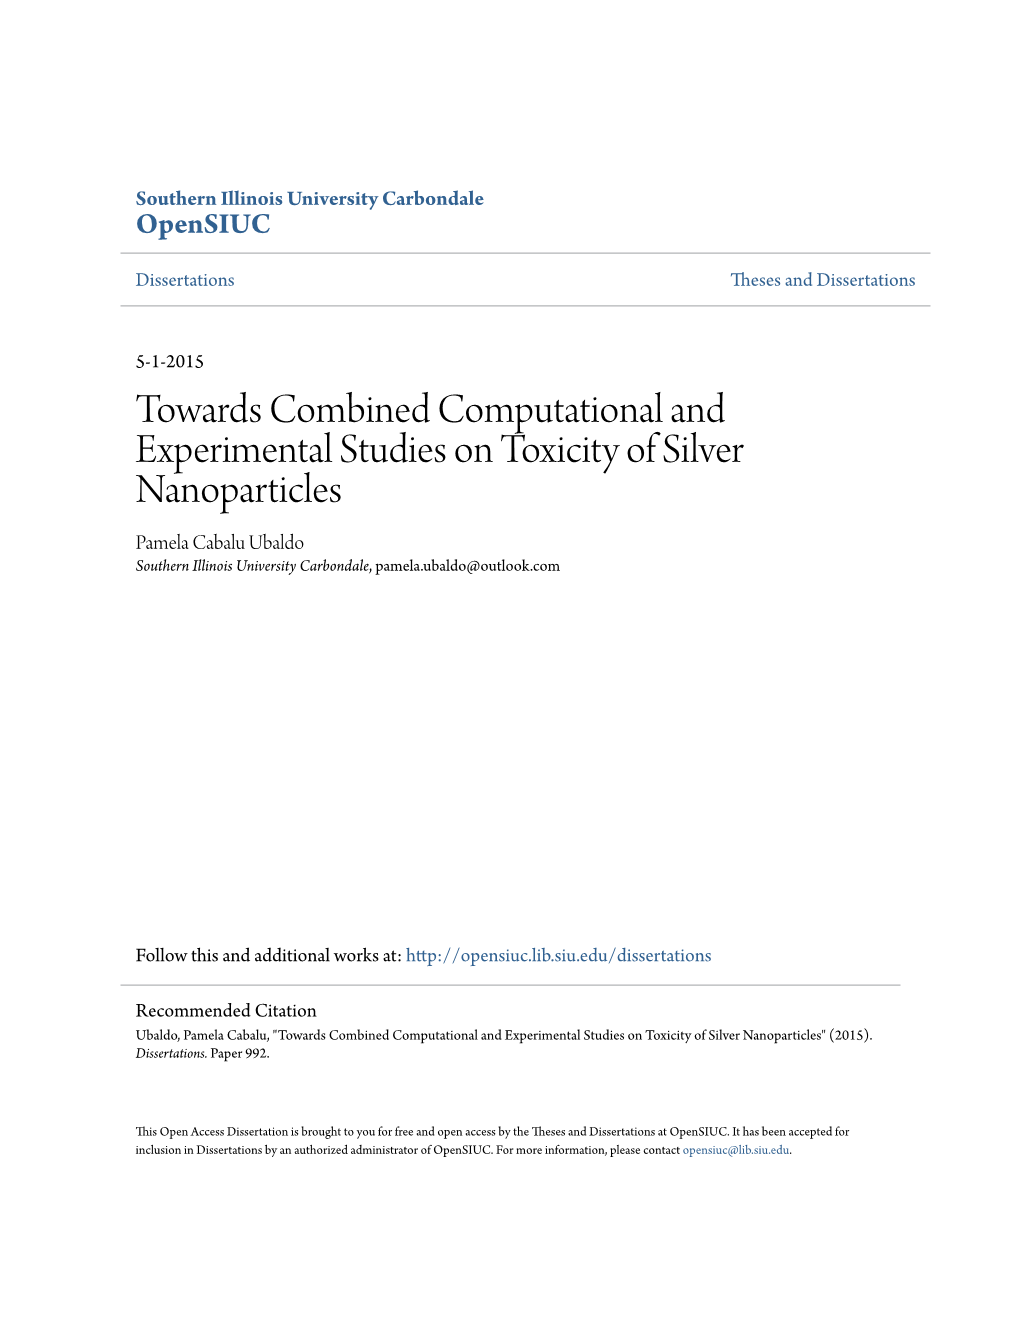 Towards Combined Computational and Experimental Studies On